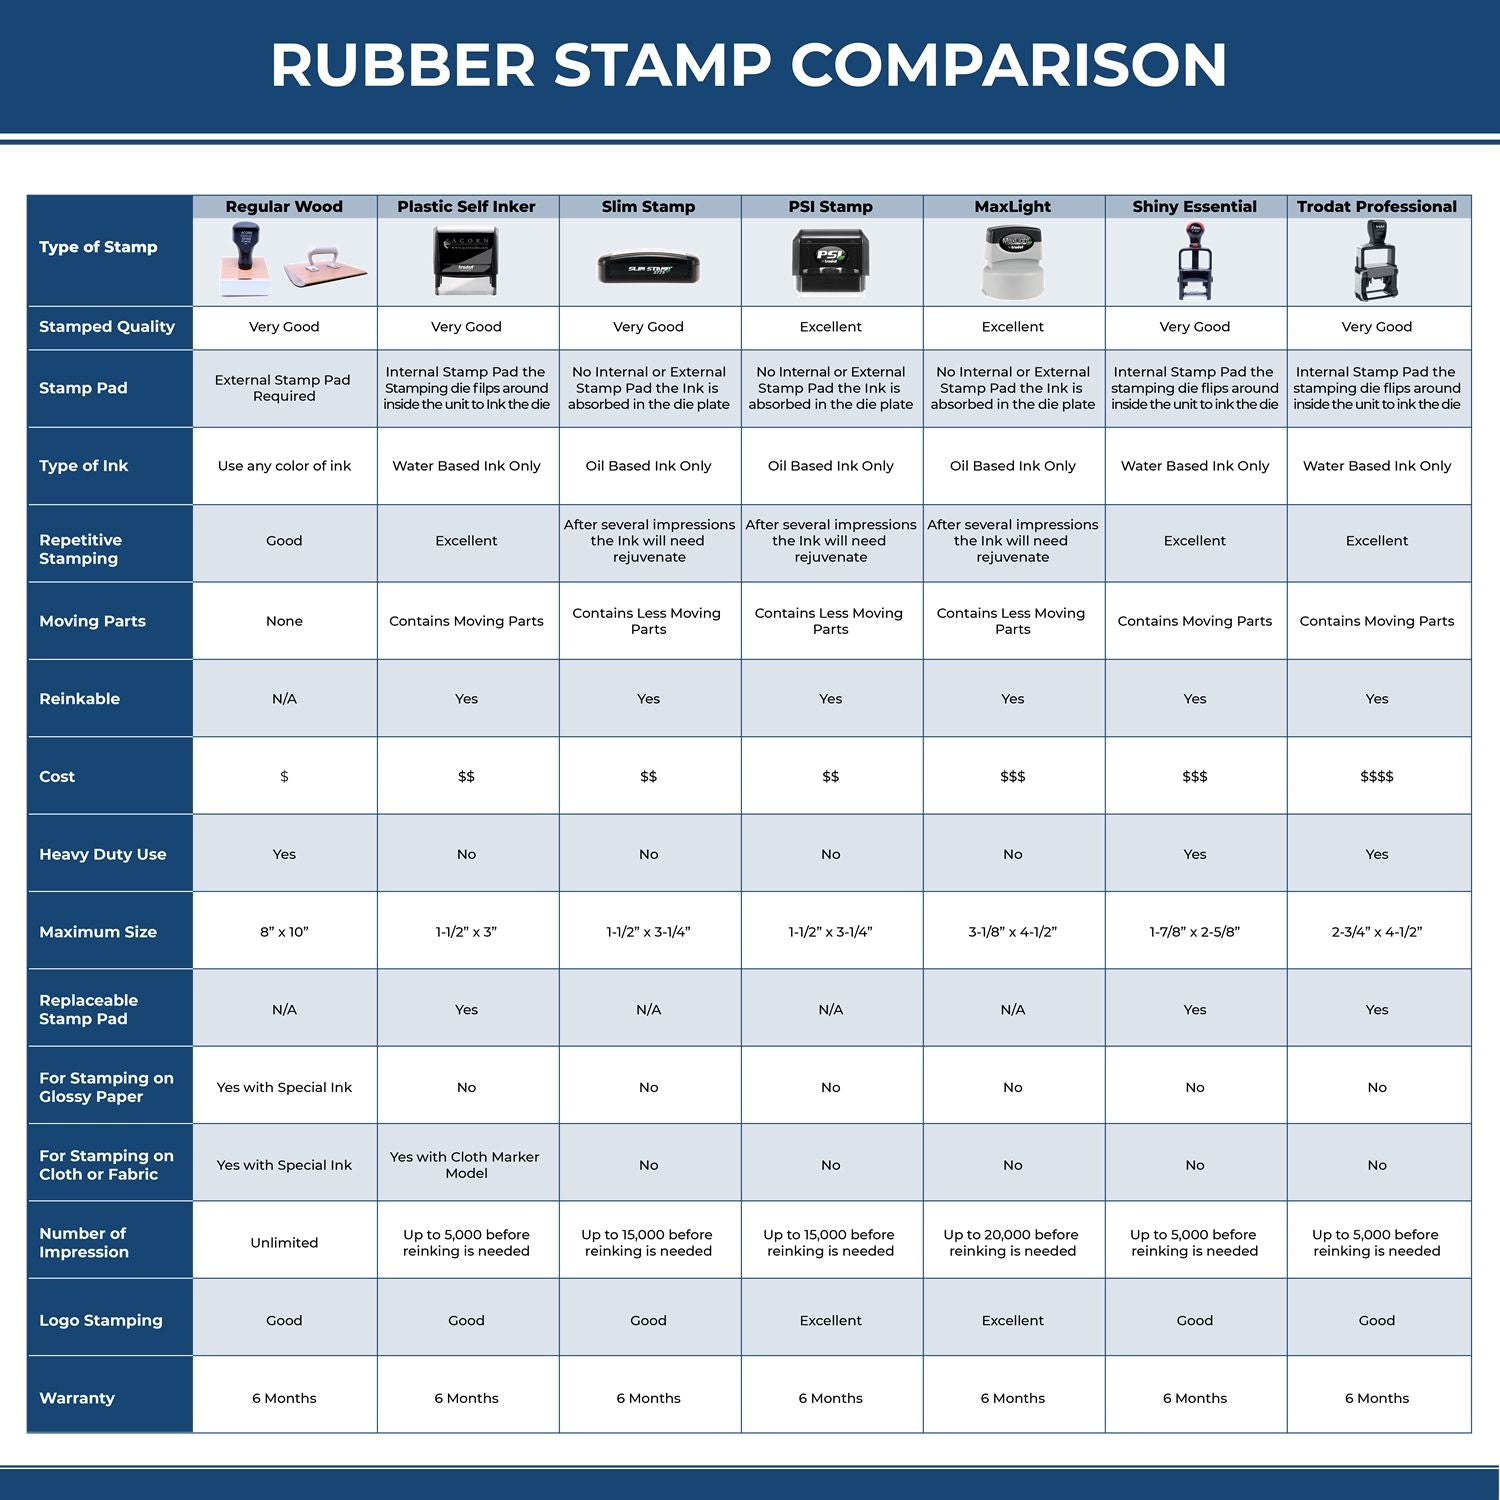 A comparison chart for the different types of mount models available for the Premium MaxLight Pre-Inked District of Columbia Engineering Stamp.